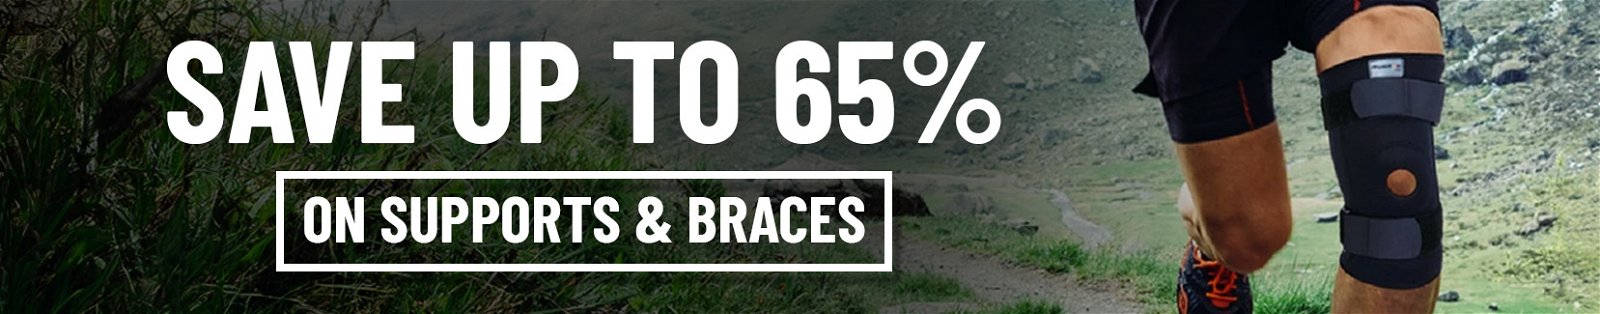 save up to 65% on support and braces